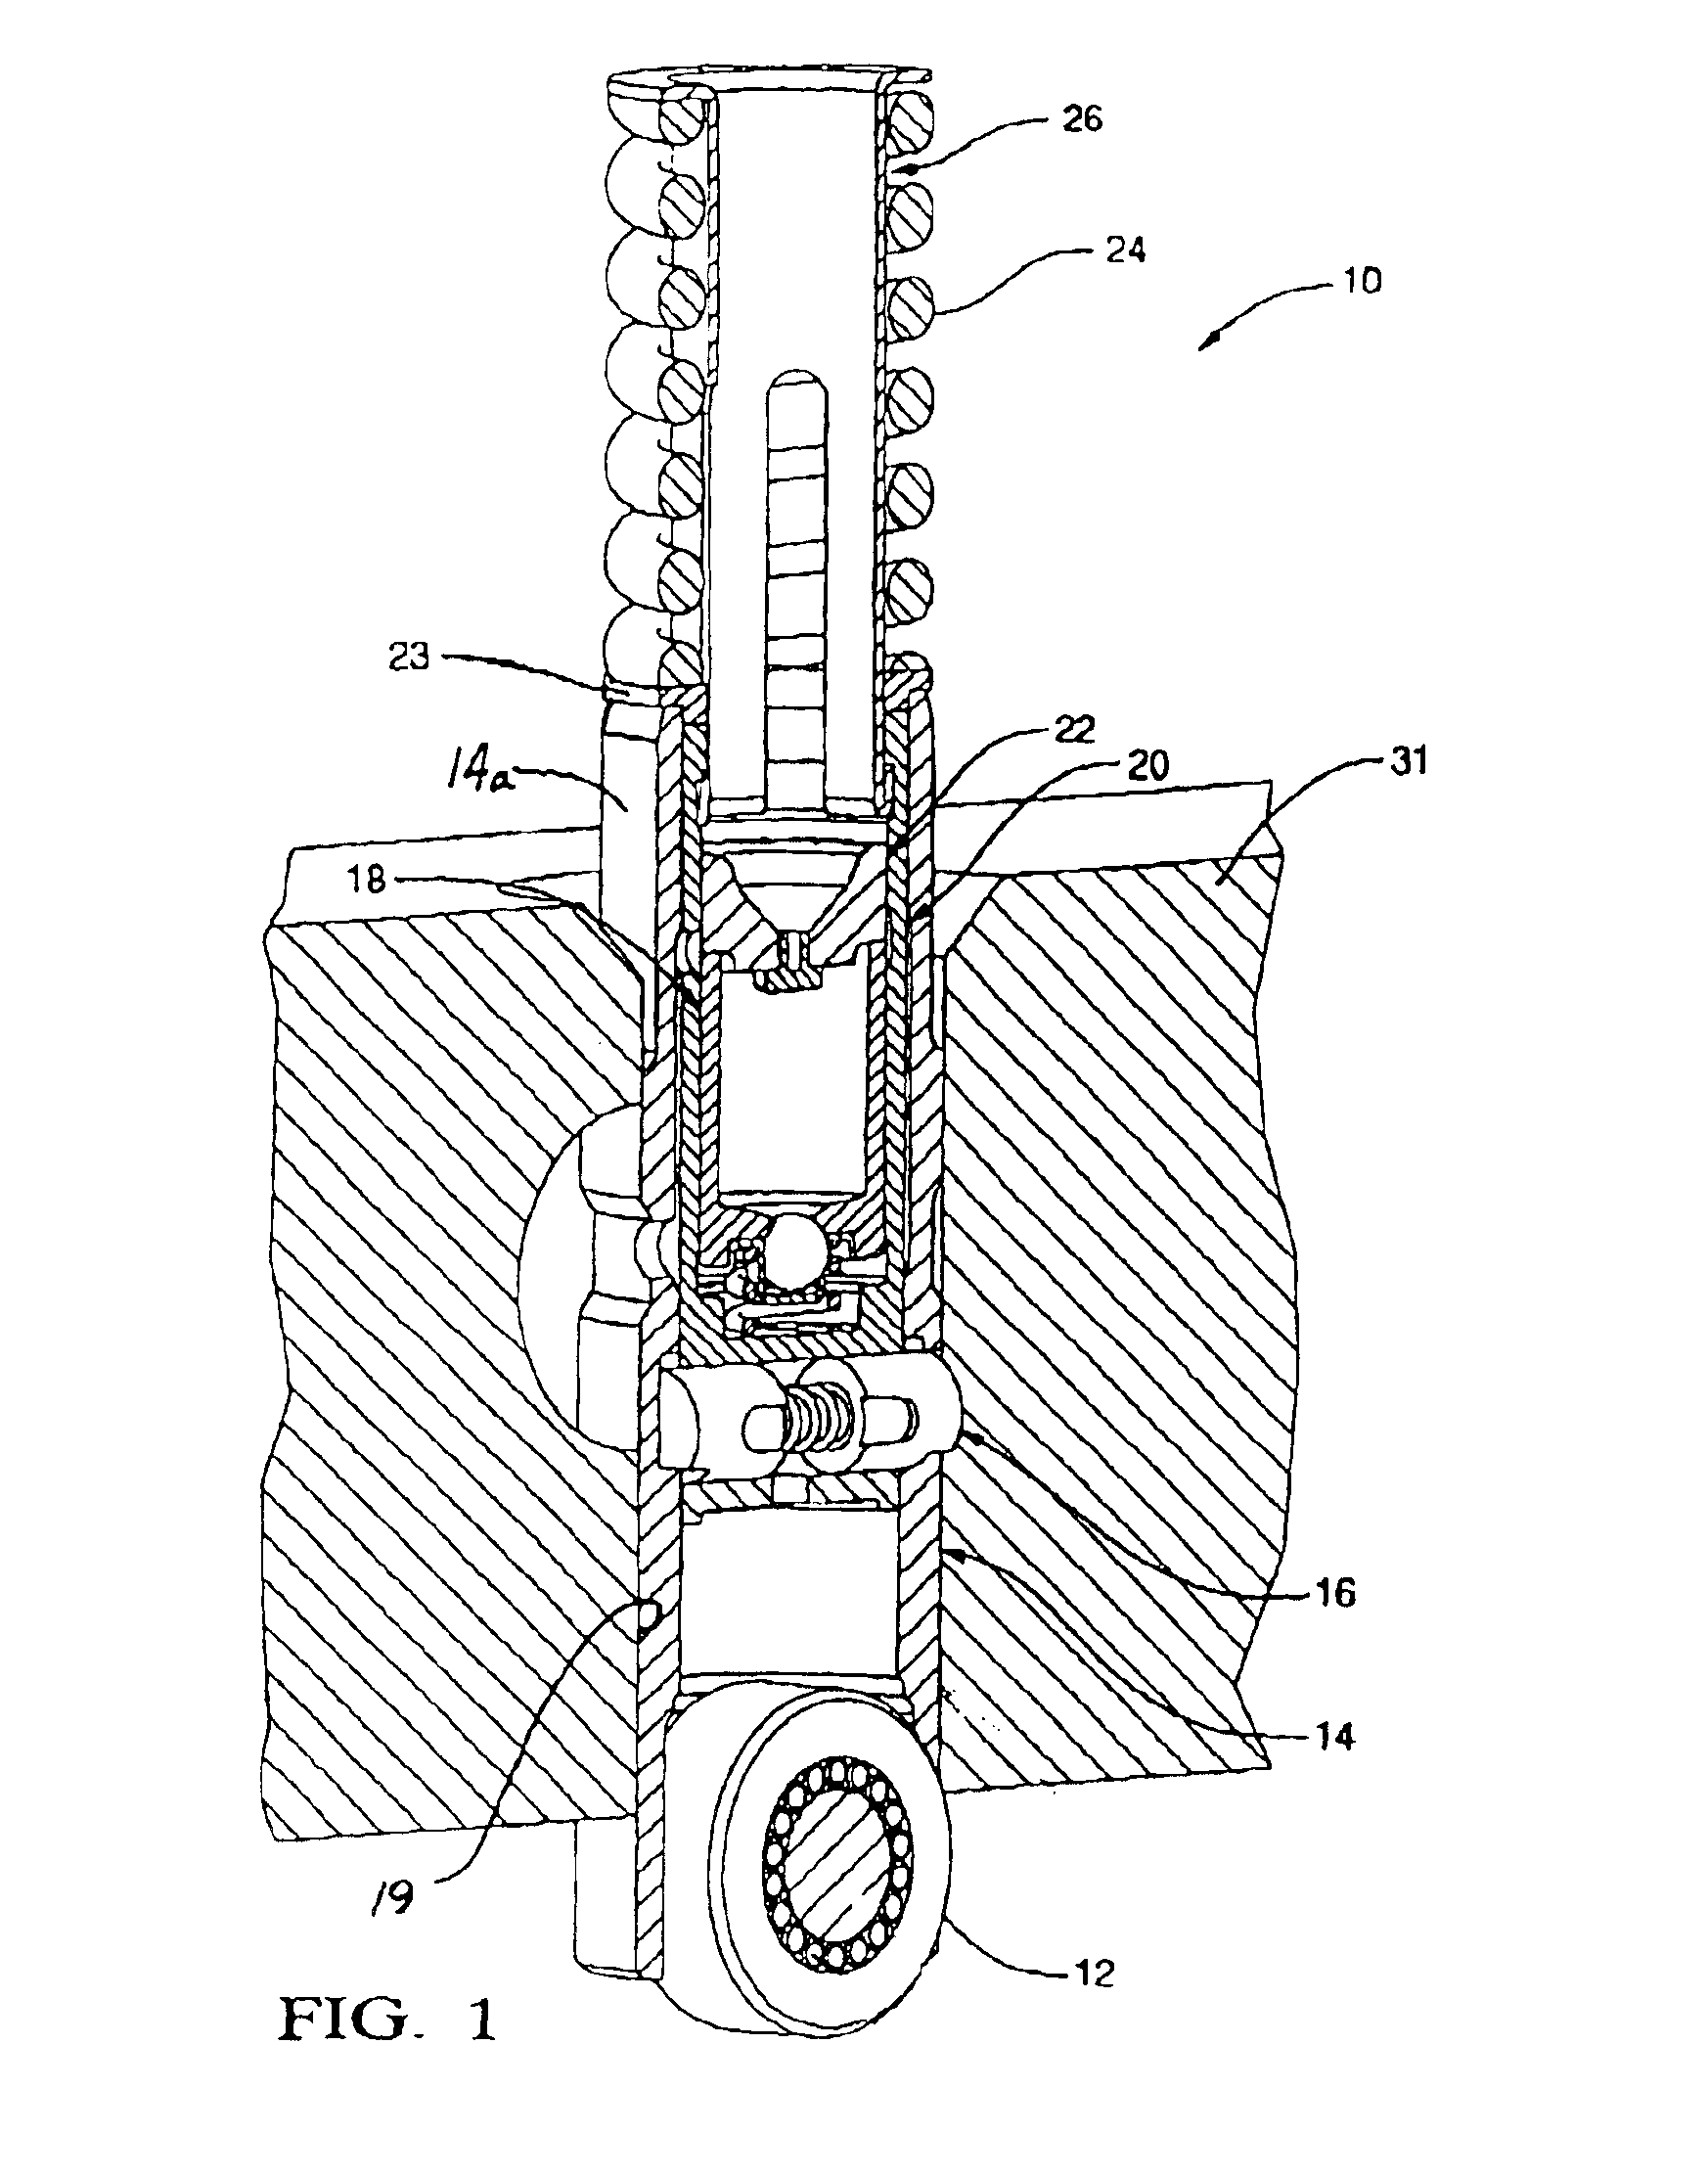 Anti-rotation guide for a deactivation hydraulic valve lifter